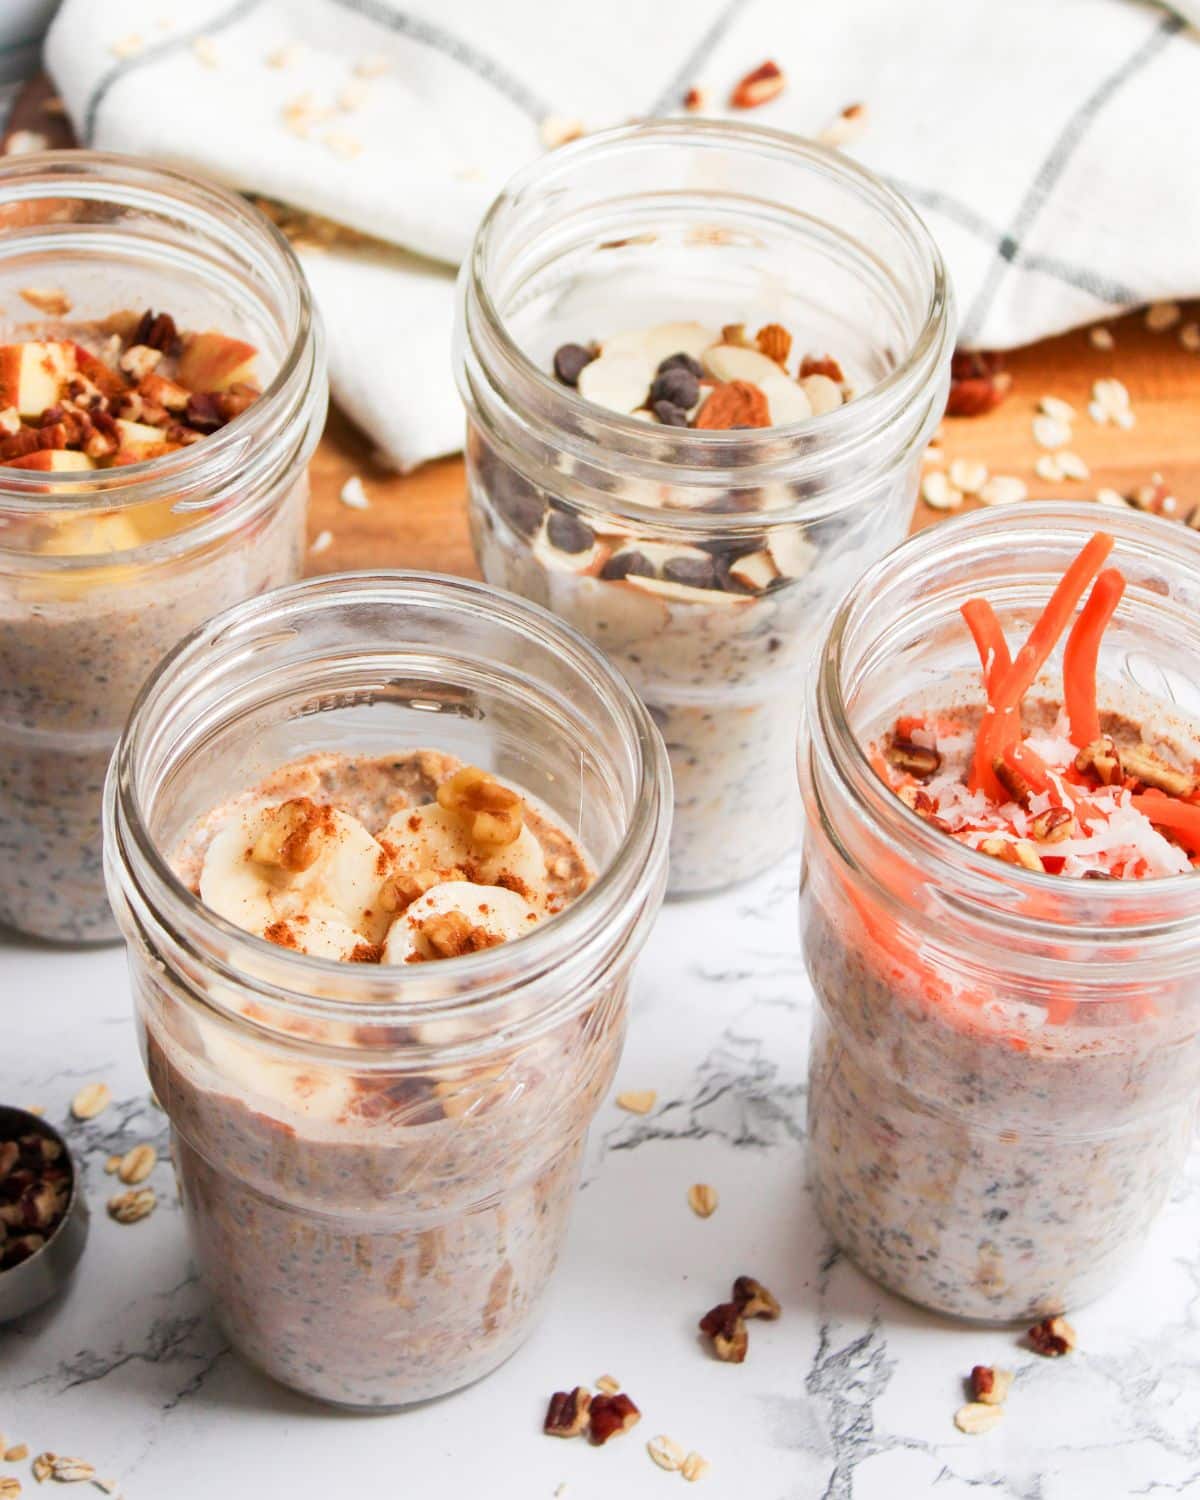 pcos overnight oats 4 different ways.